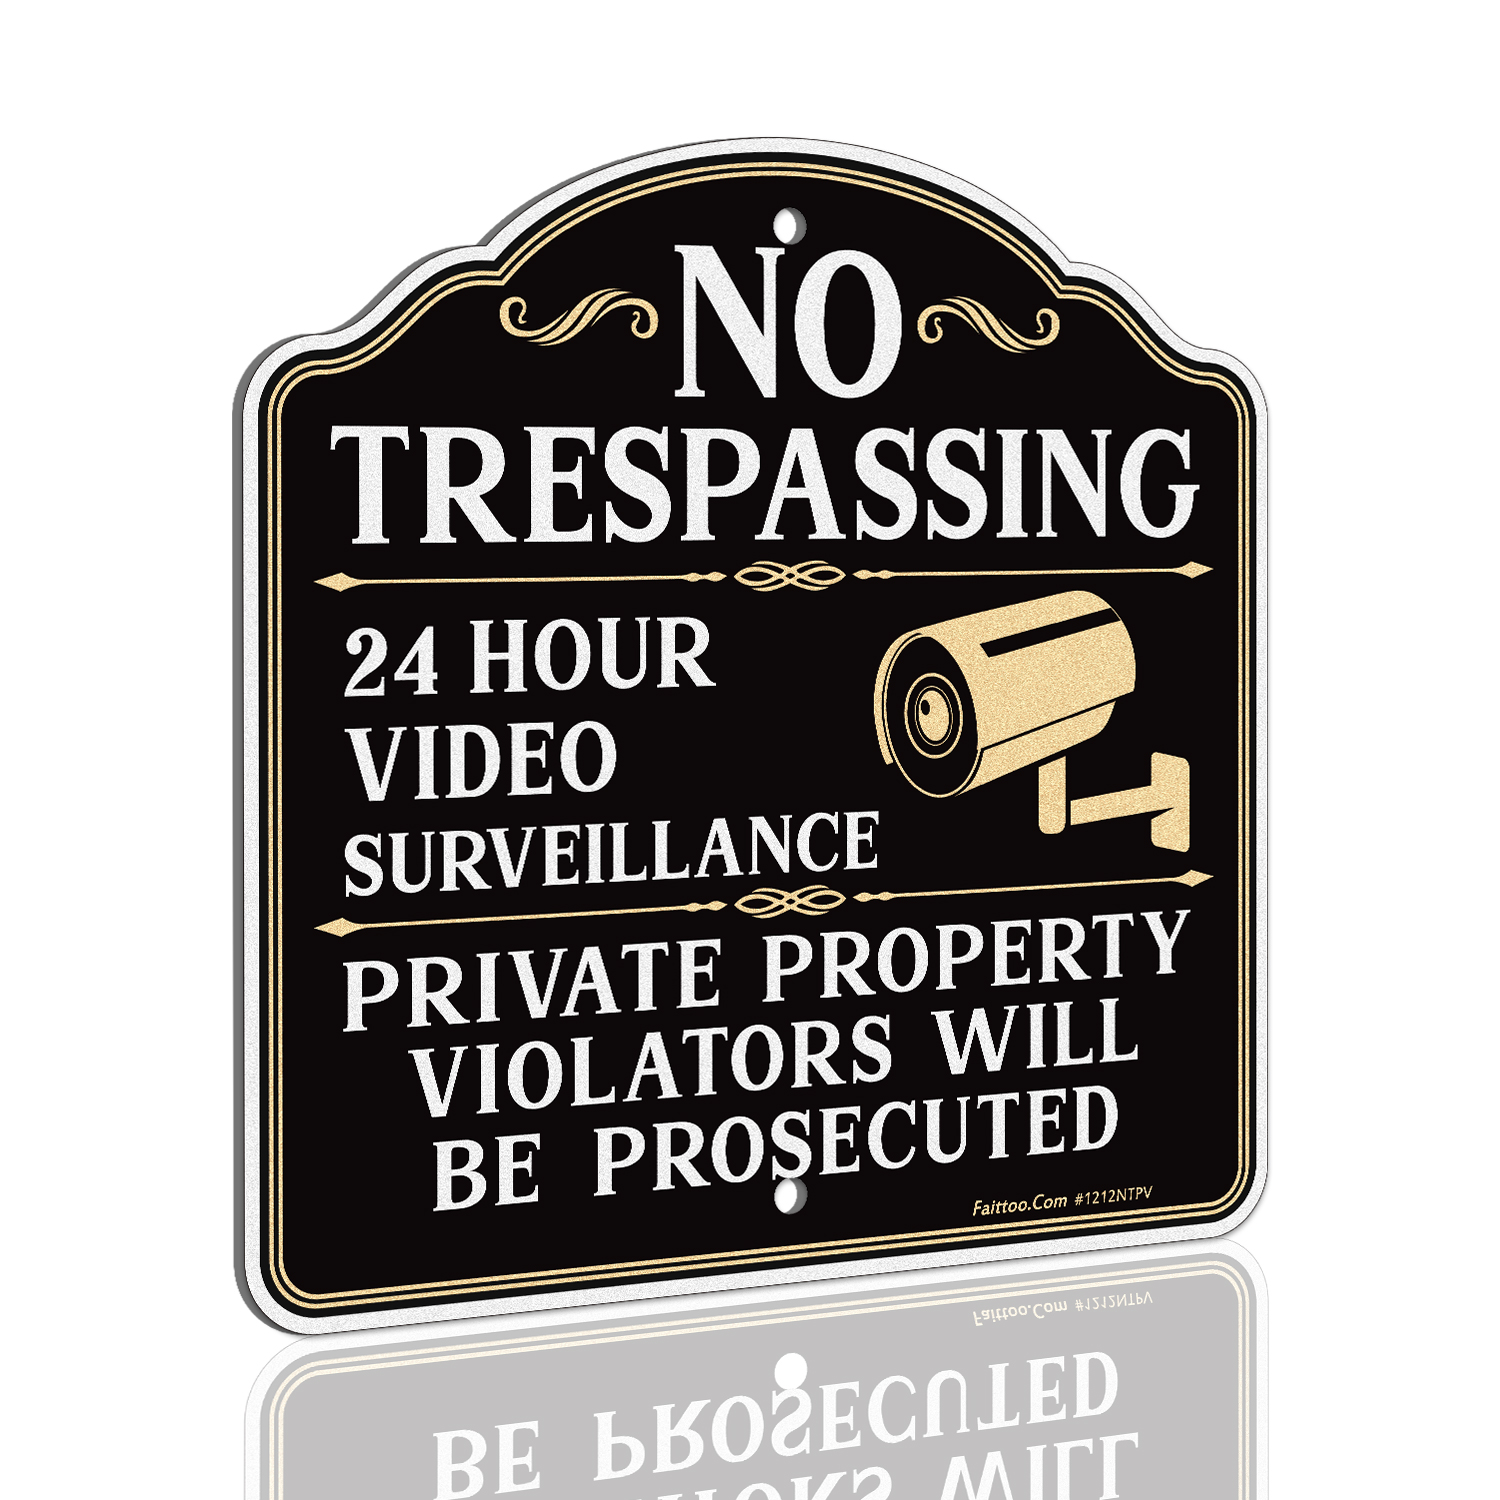 Faittoo No Trespassing Sign Private Property Protected By Video Surveillance Violators Will Be Prosecuted Sign, 11.6 x 11.6 Inch Reflective Aluminum Warning Sign, Weather/Fade Resistant, Easy to Install